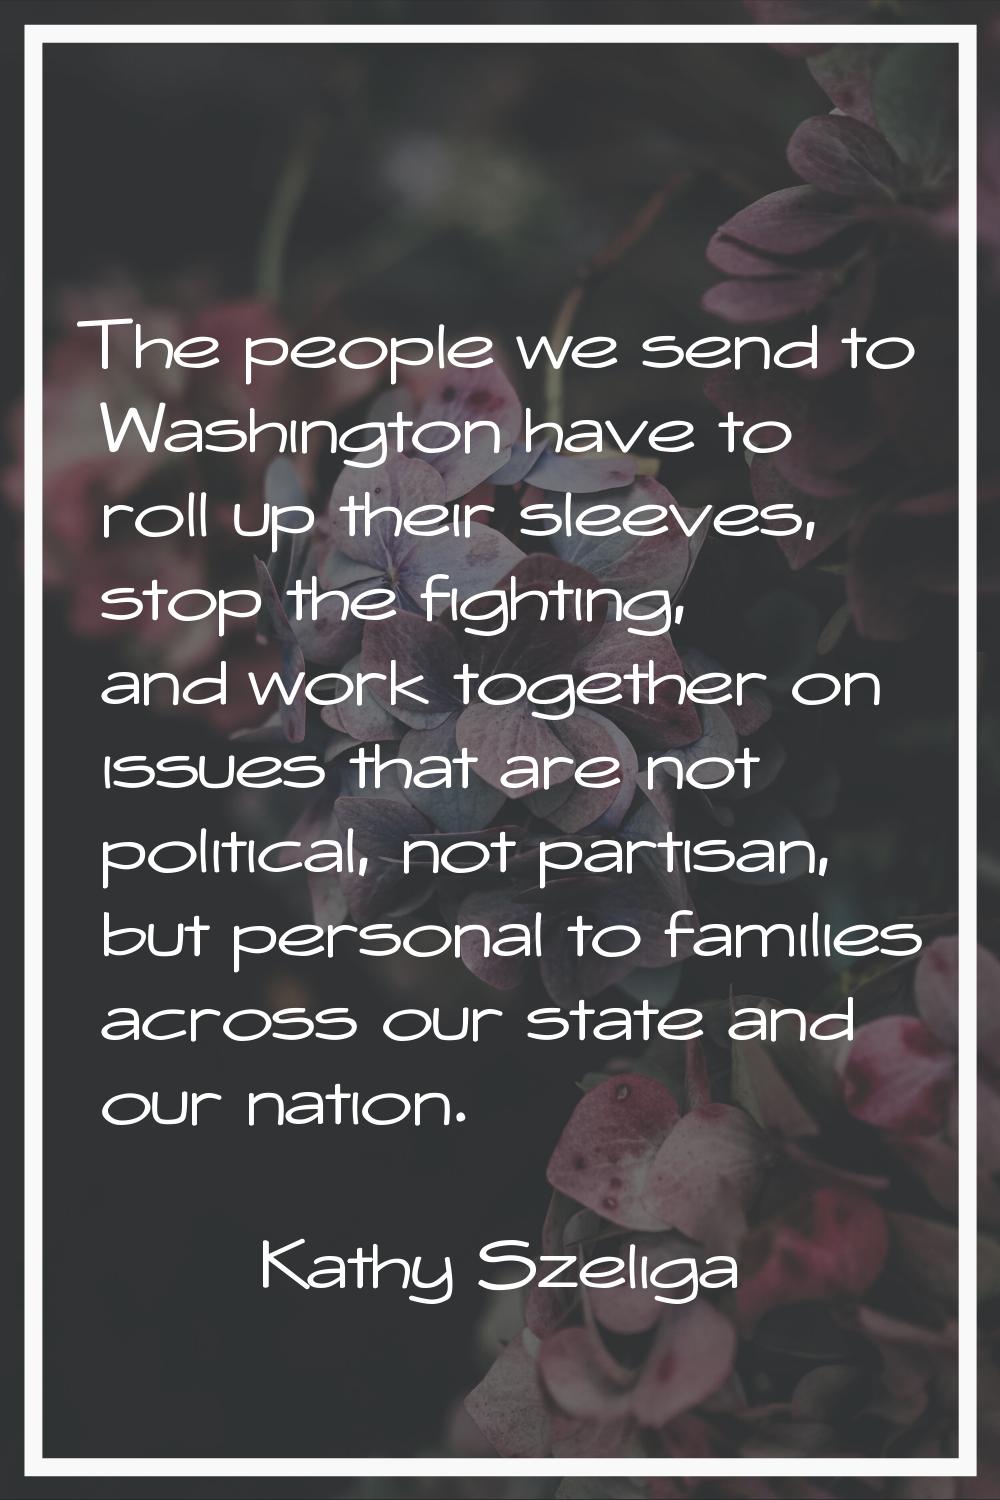 The people we send to Washington have to roll up their sleeves, stop the fighting, and work togethe